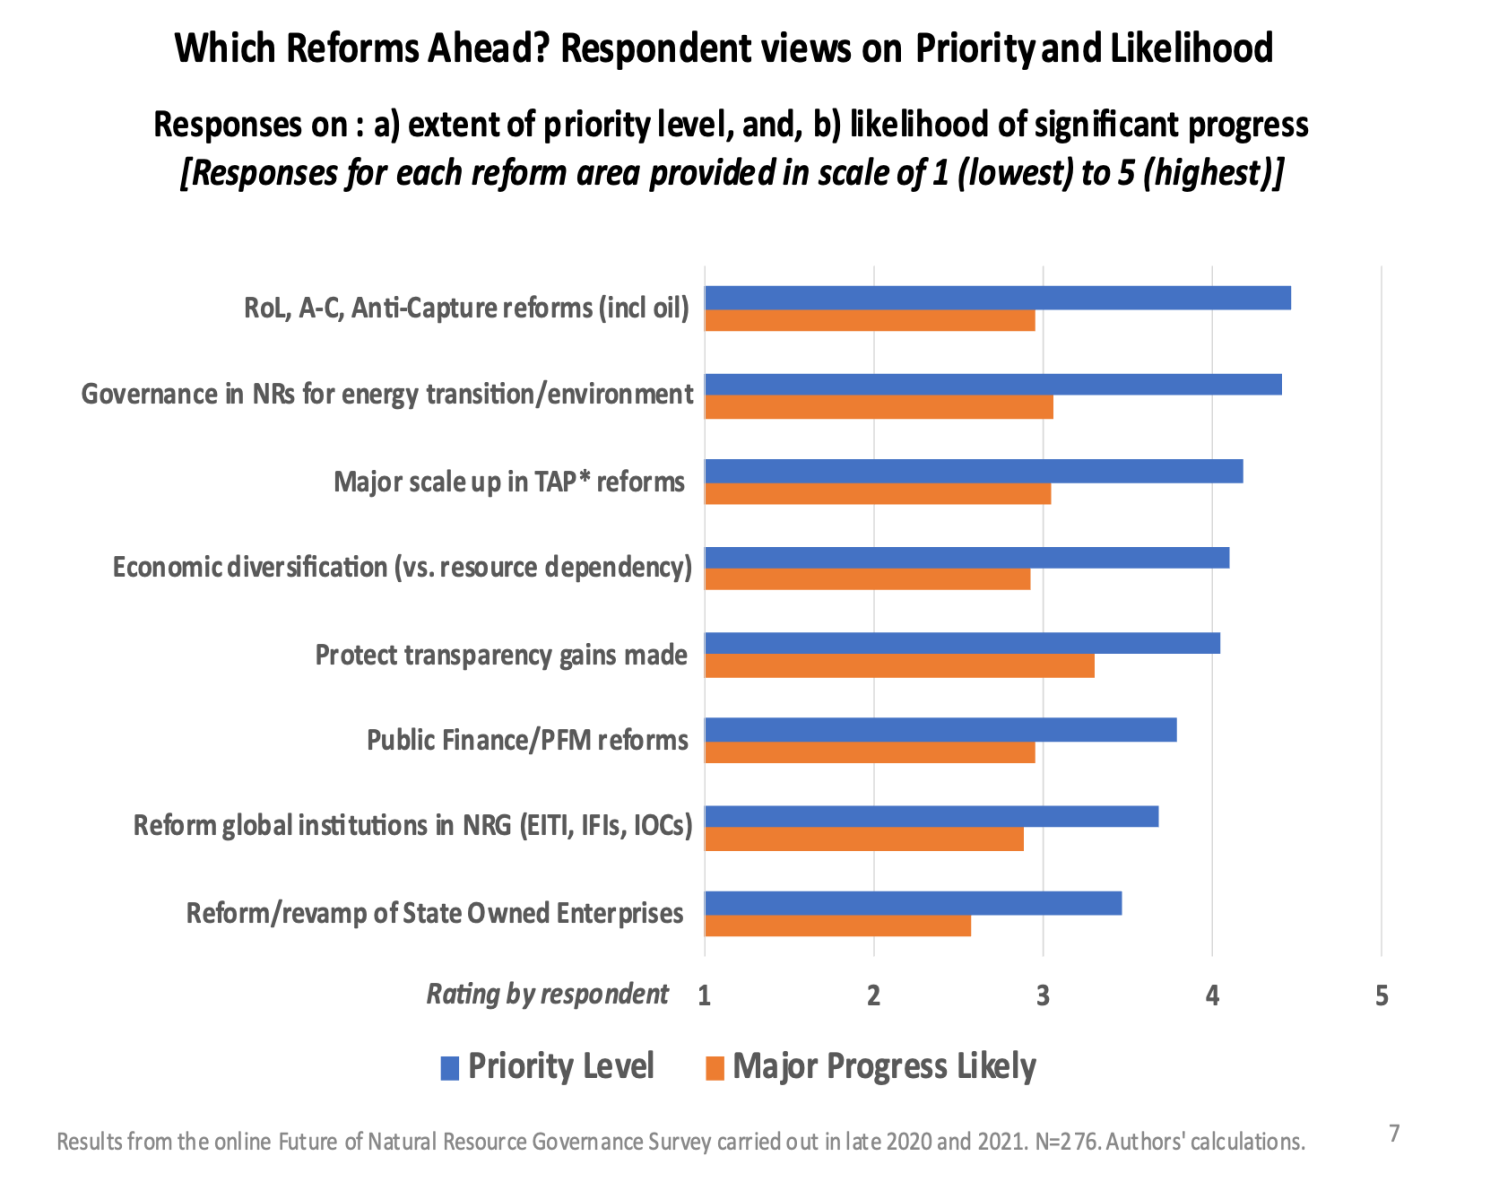 A chart depicting respondent views of reforms ahead, with Anti-Capture reforms being the highest priority.